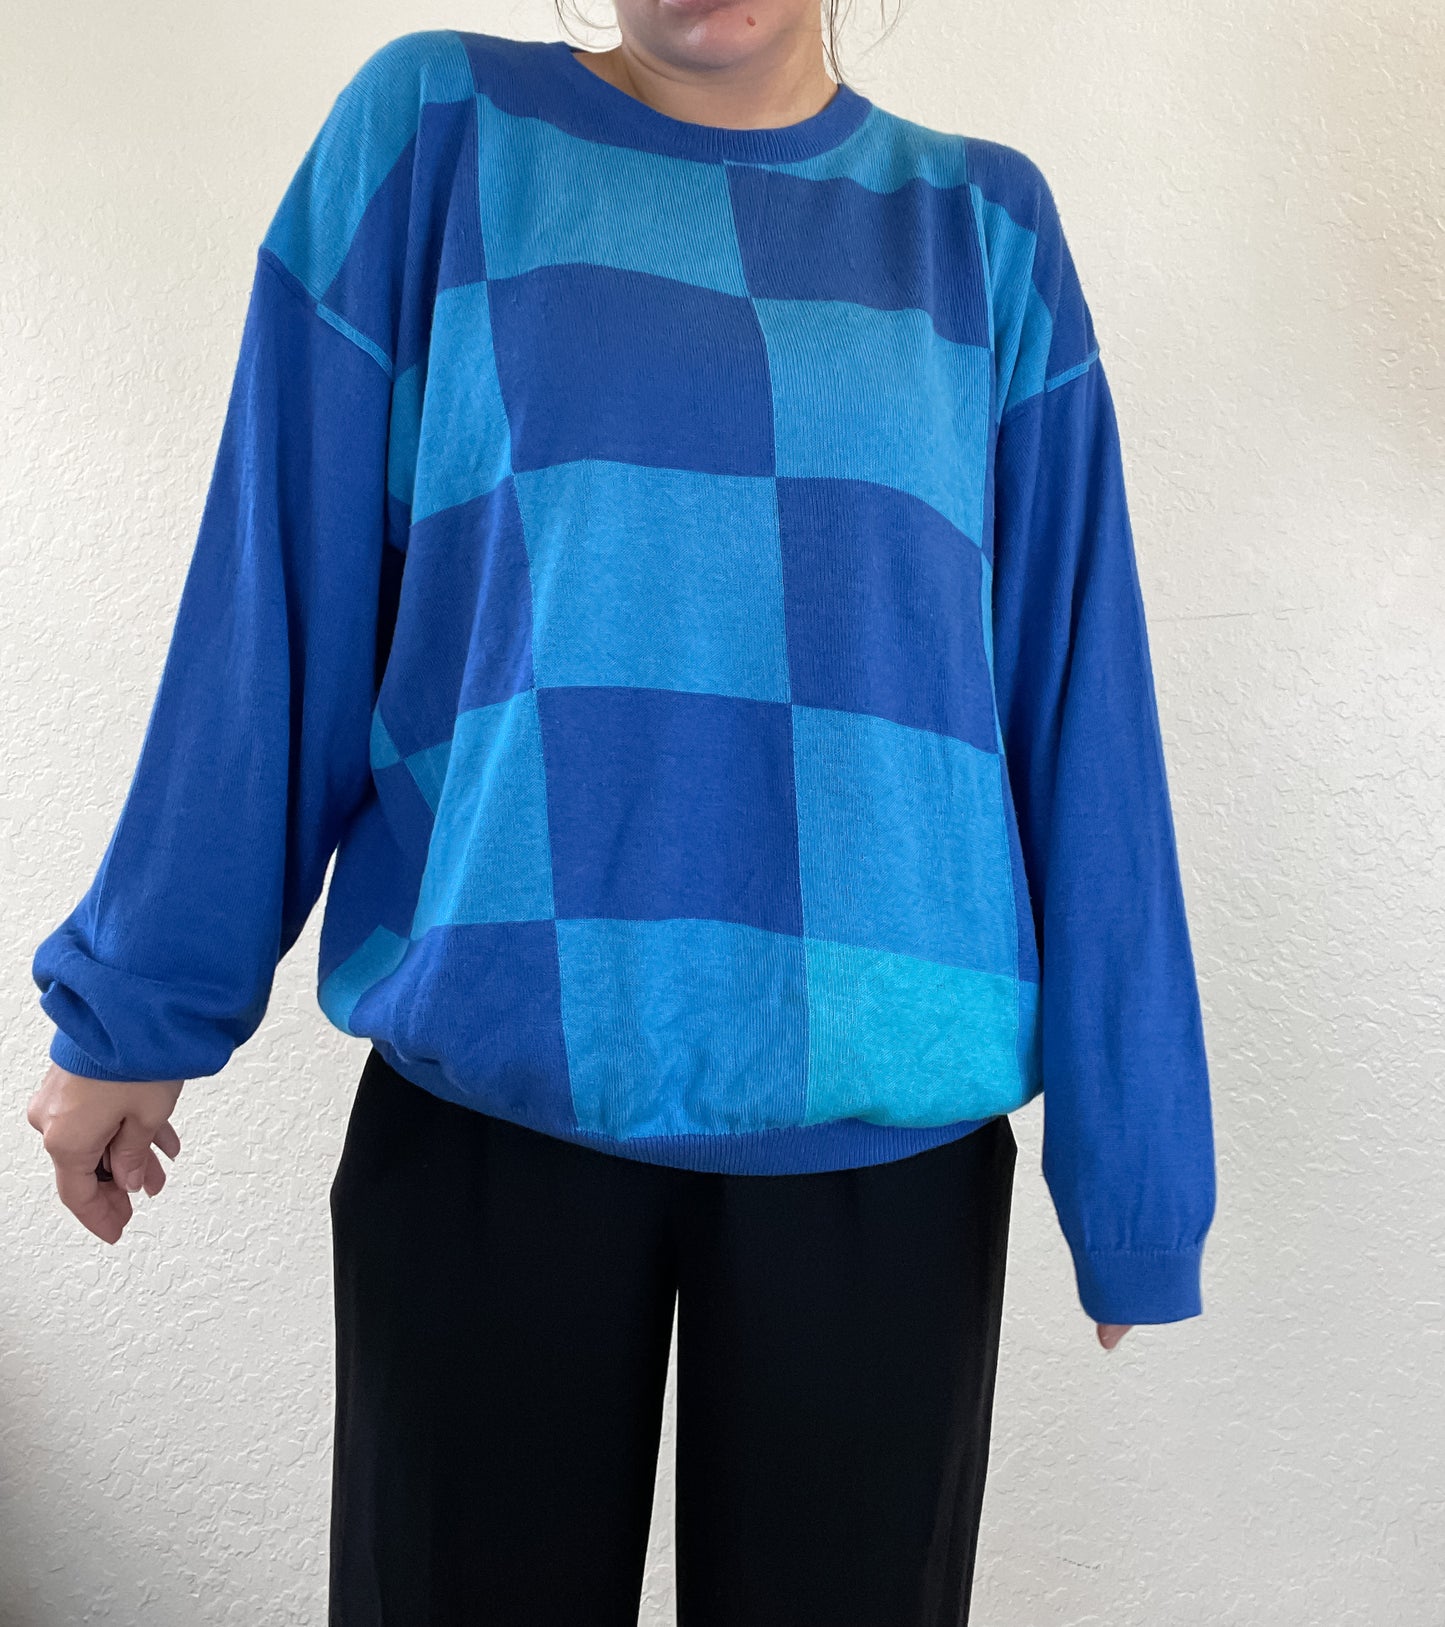 Blue checkered sweater